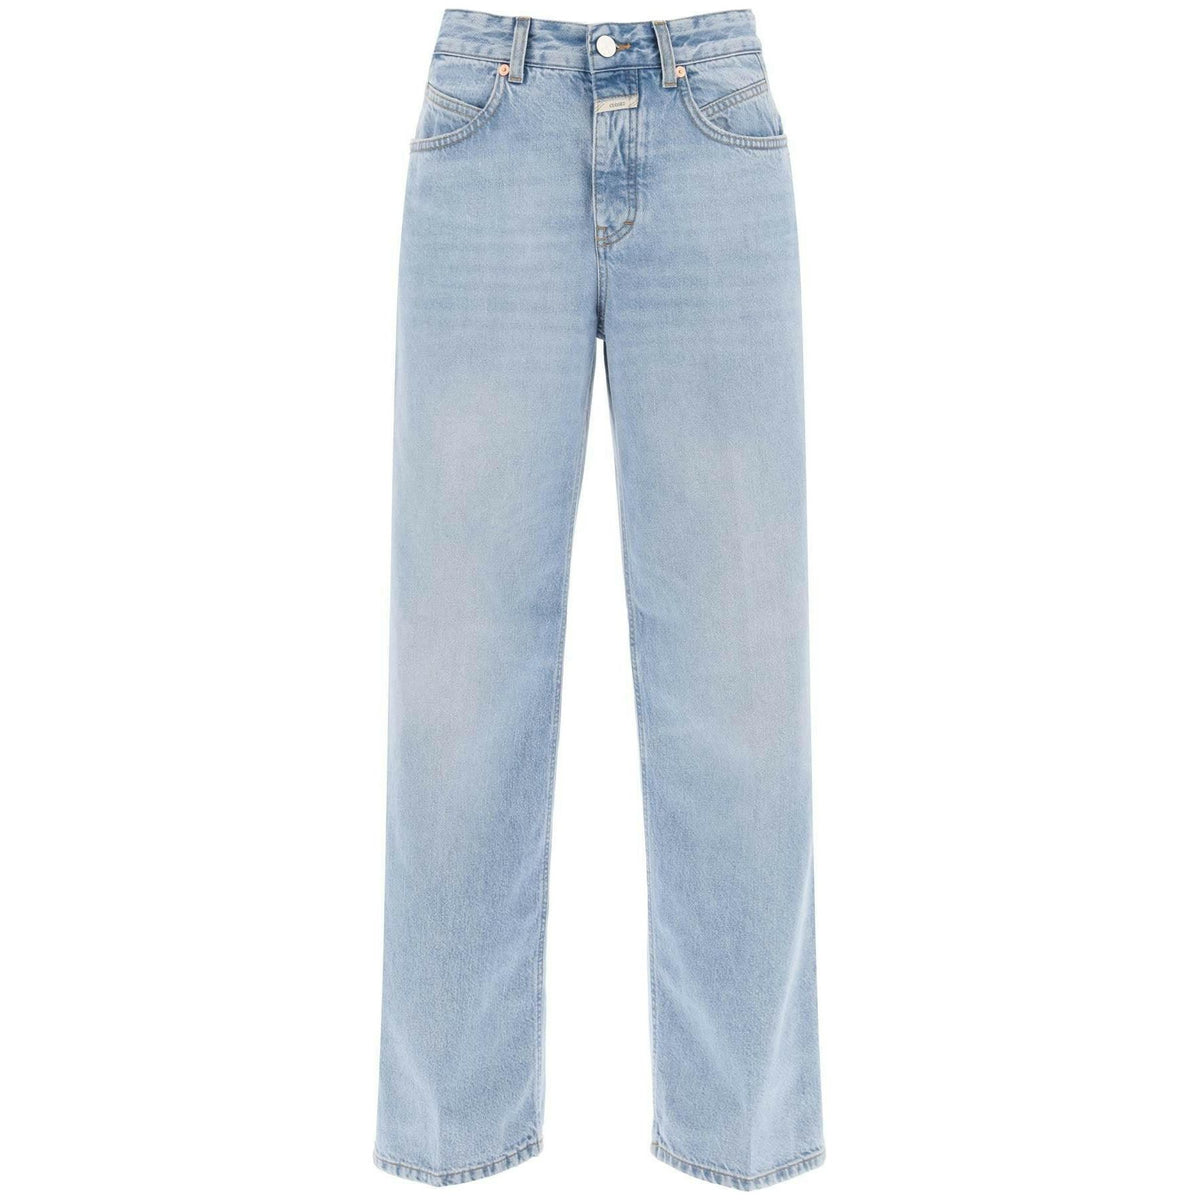 CLOSED - Loose Jeans With Tapered Cut - JOHN JULIA